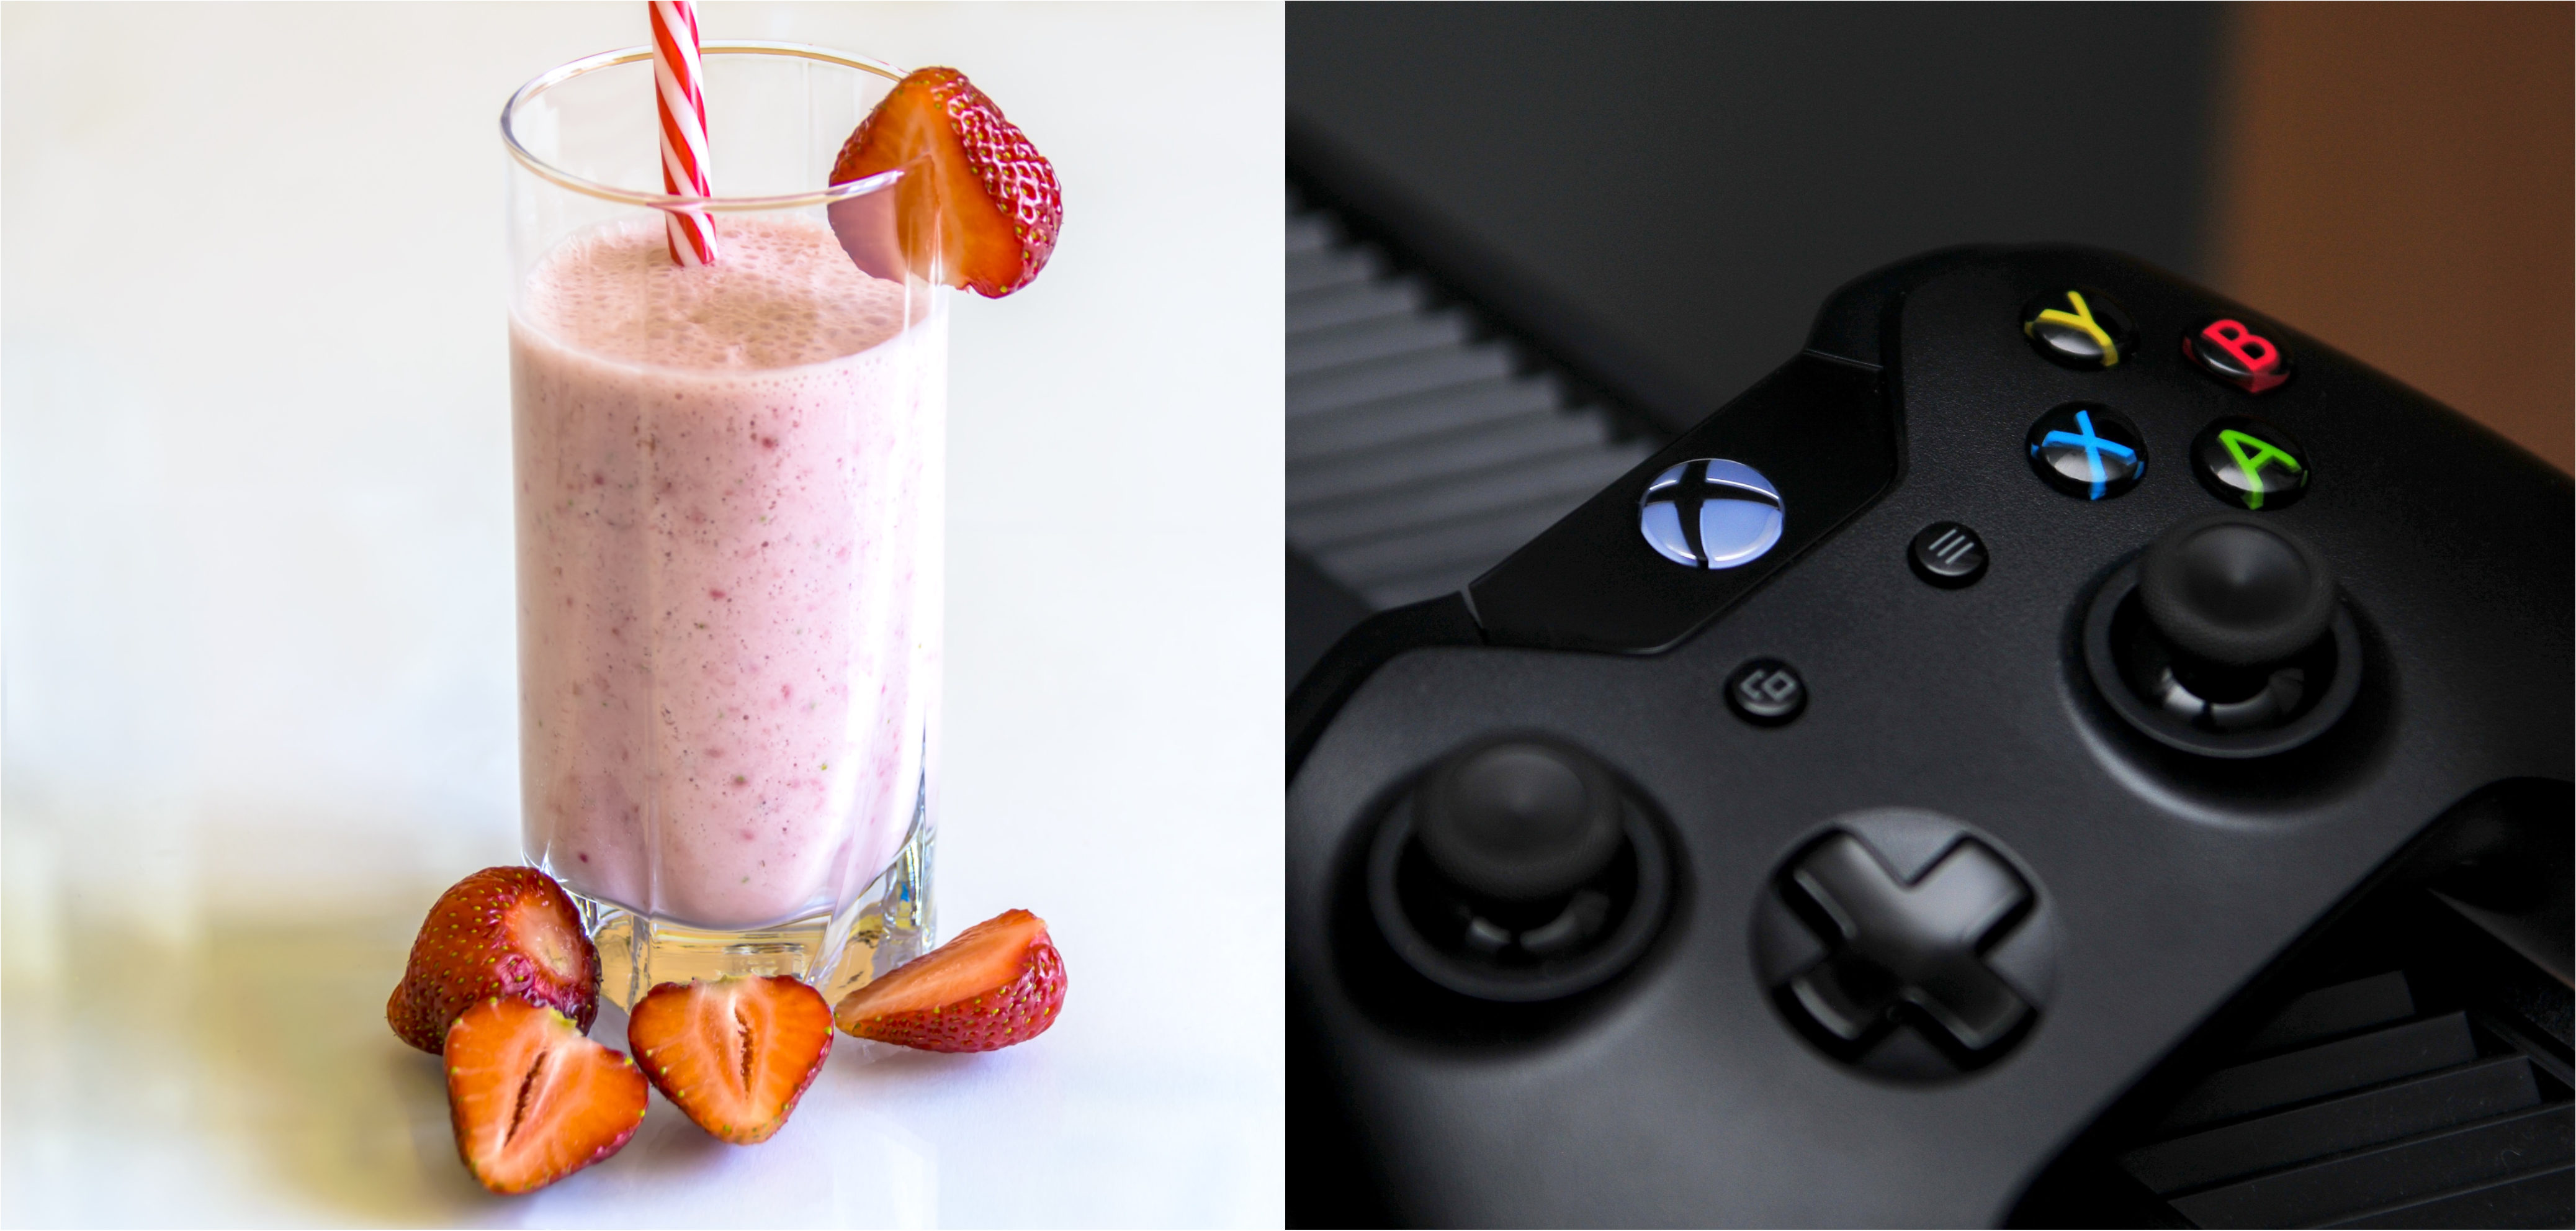 Side by side images of a strawberry smoothie and a x-box controller.